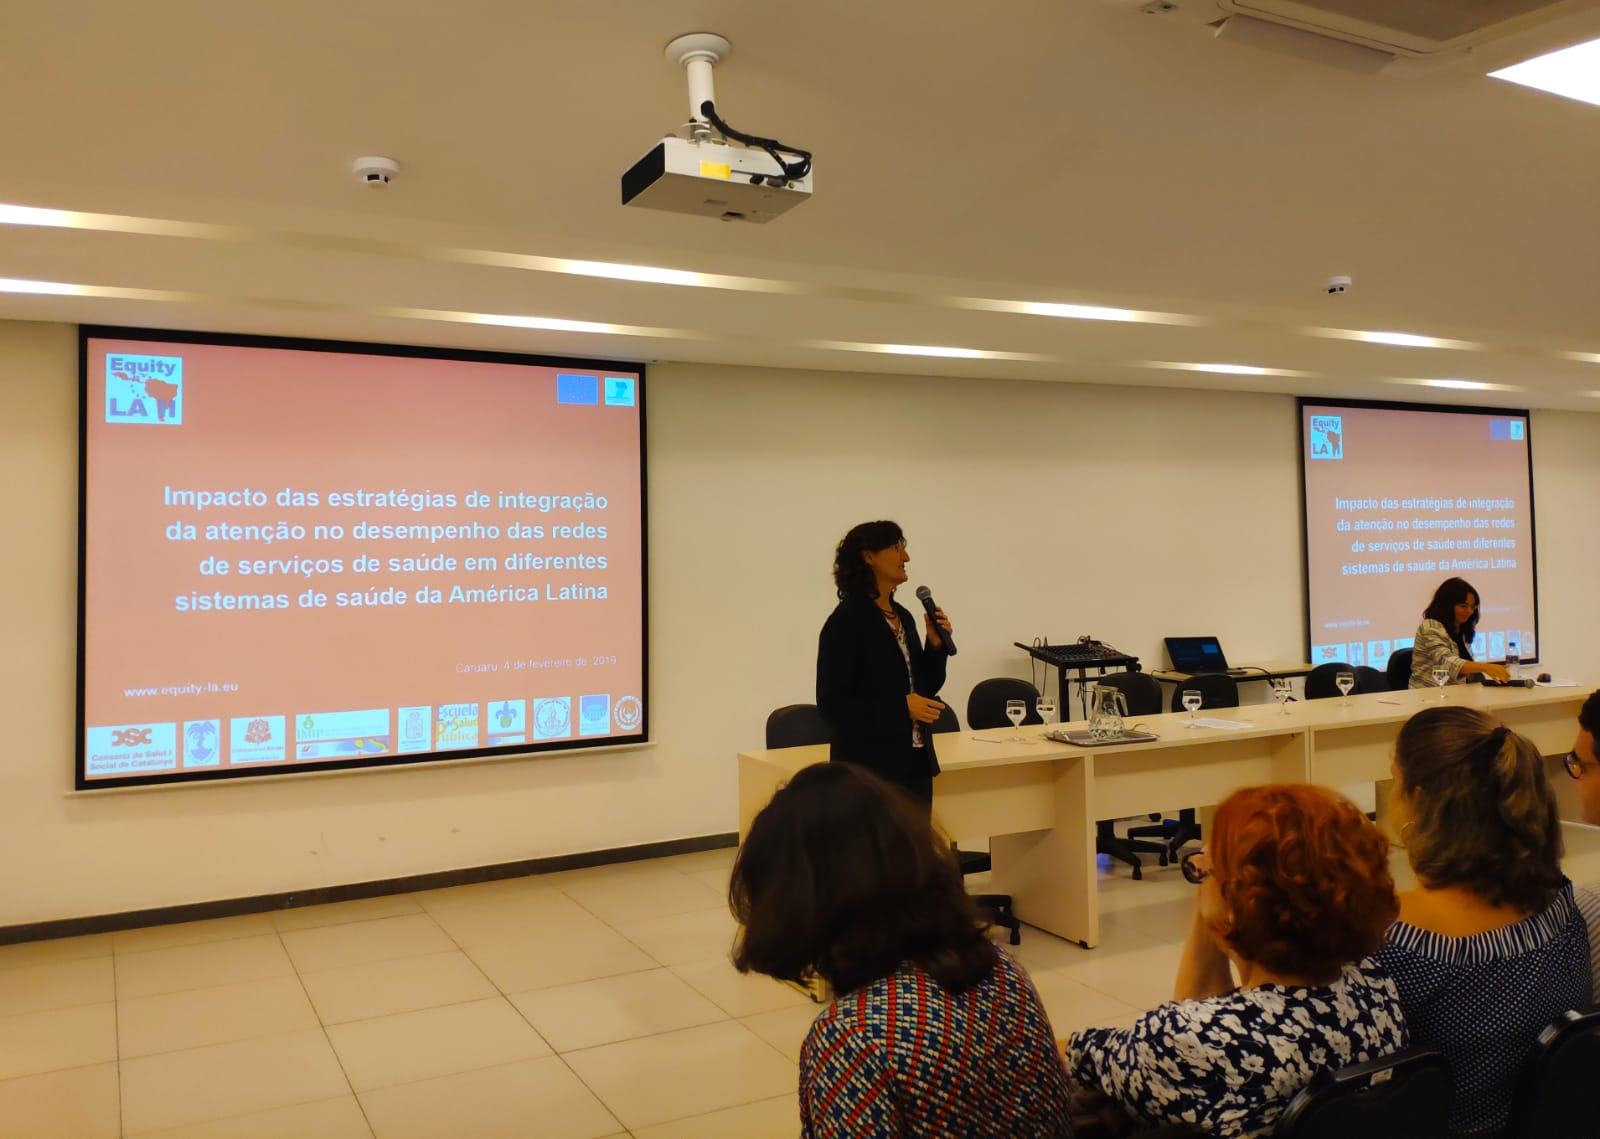 Success of the public seminar held in Brazil on experiences of integration of care to health services in Latin America